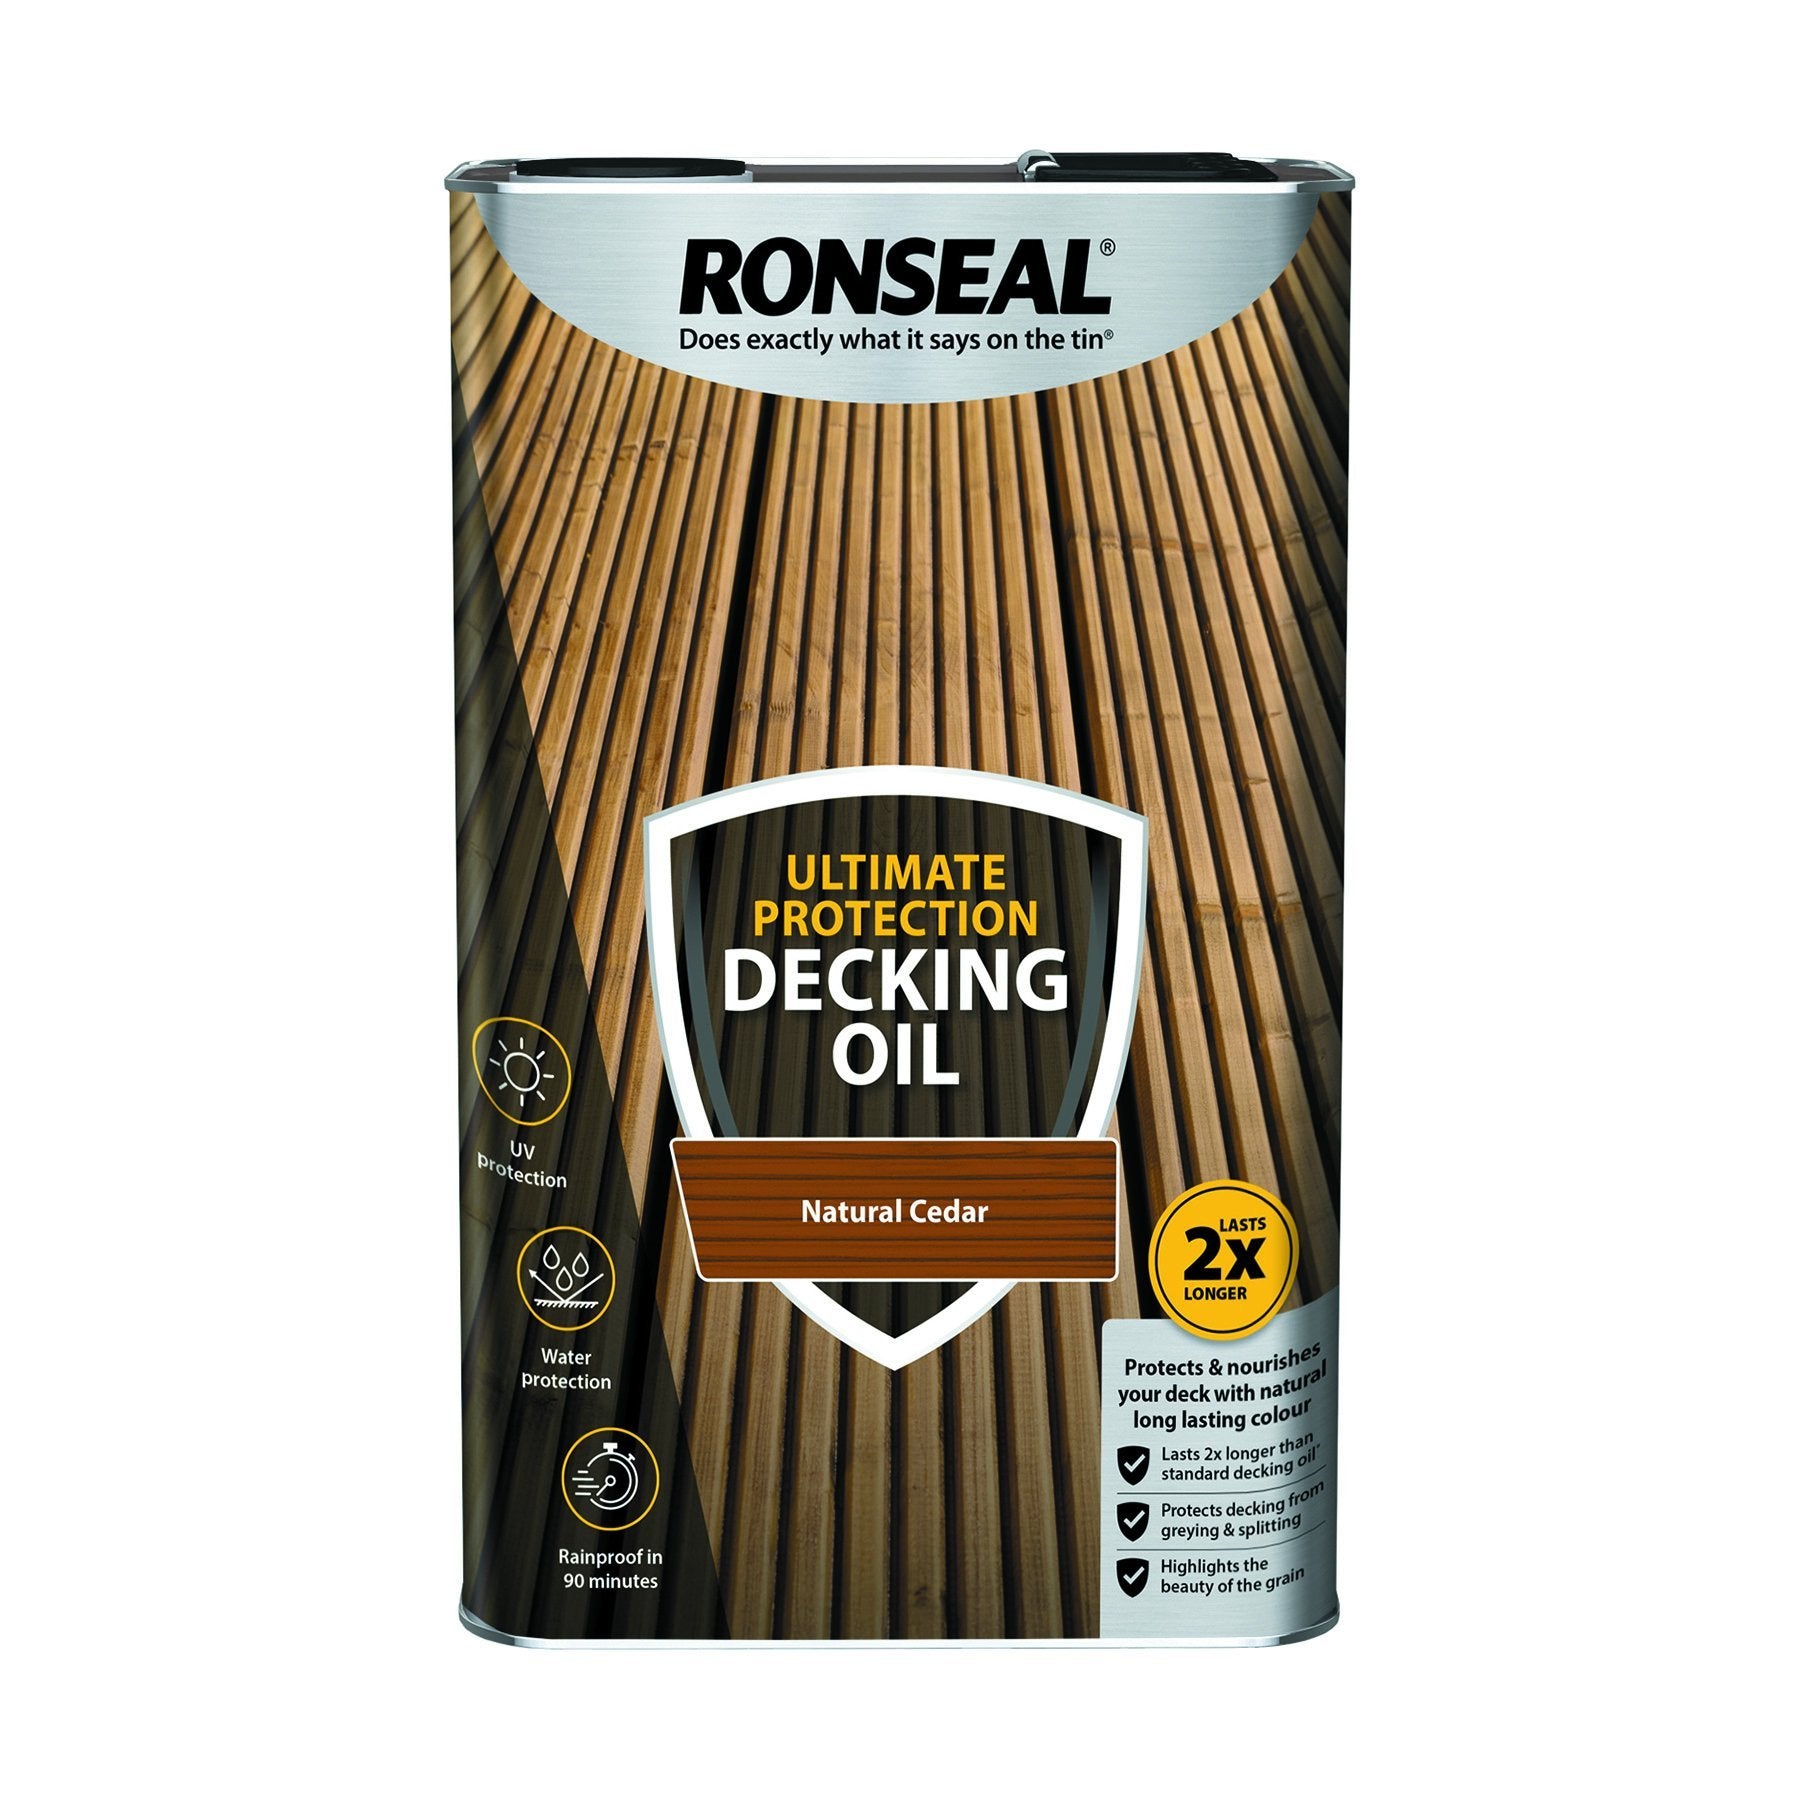 ronseal-ultimate-protection-decking-oil-5l-tin